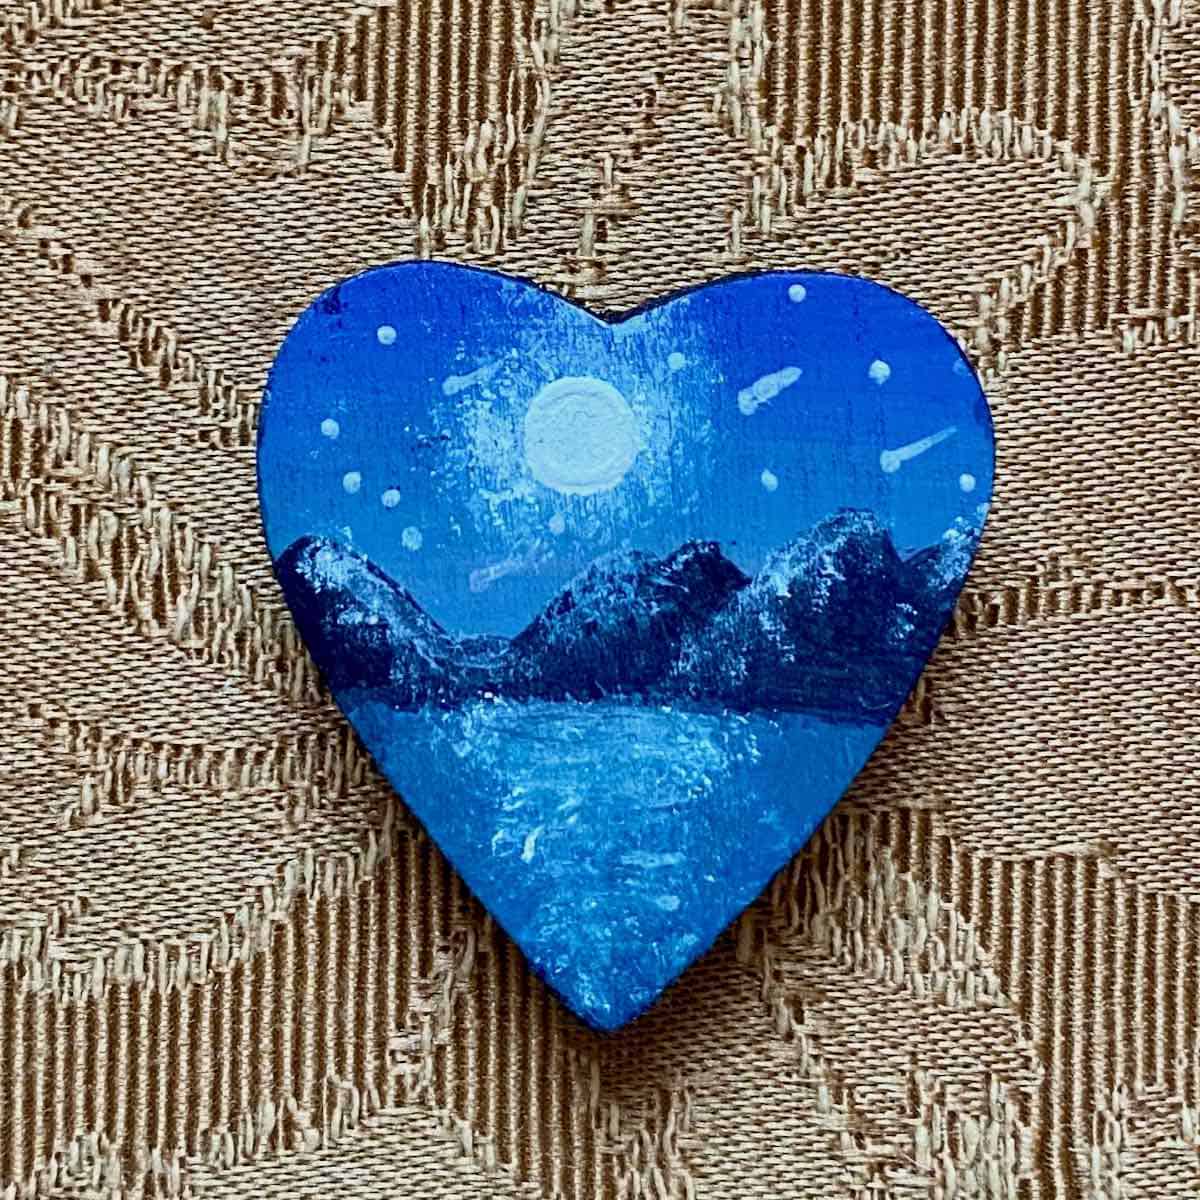 painted blue heart for a lovely grief poem